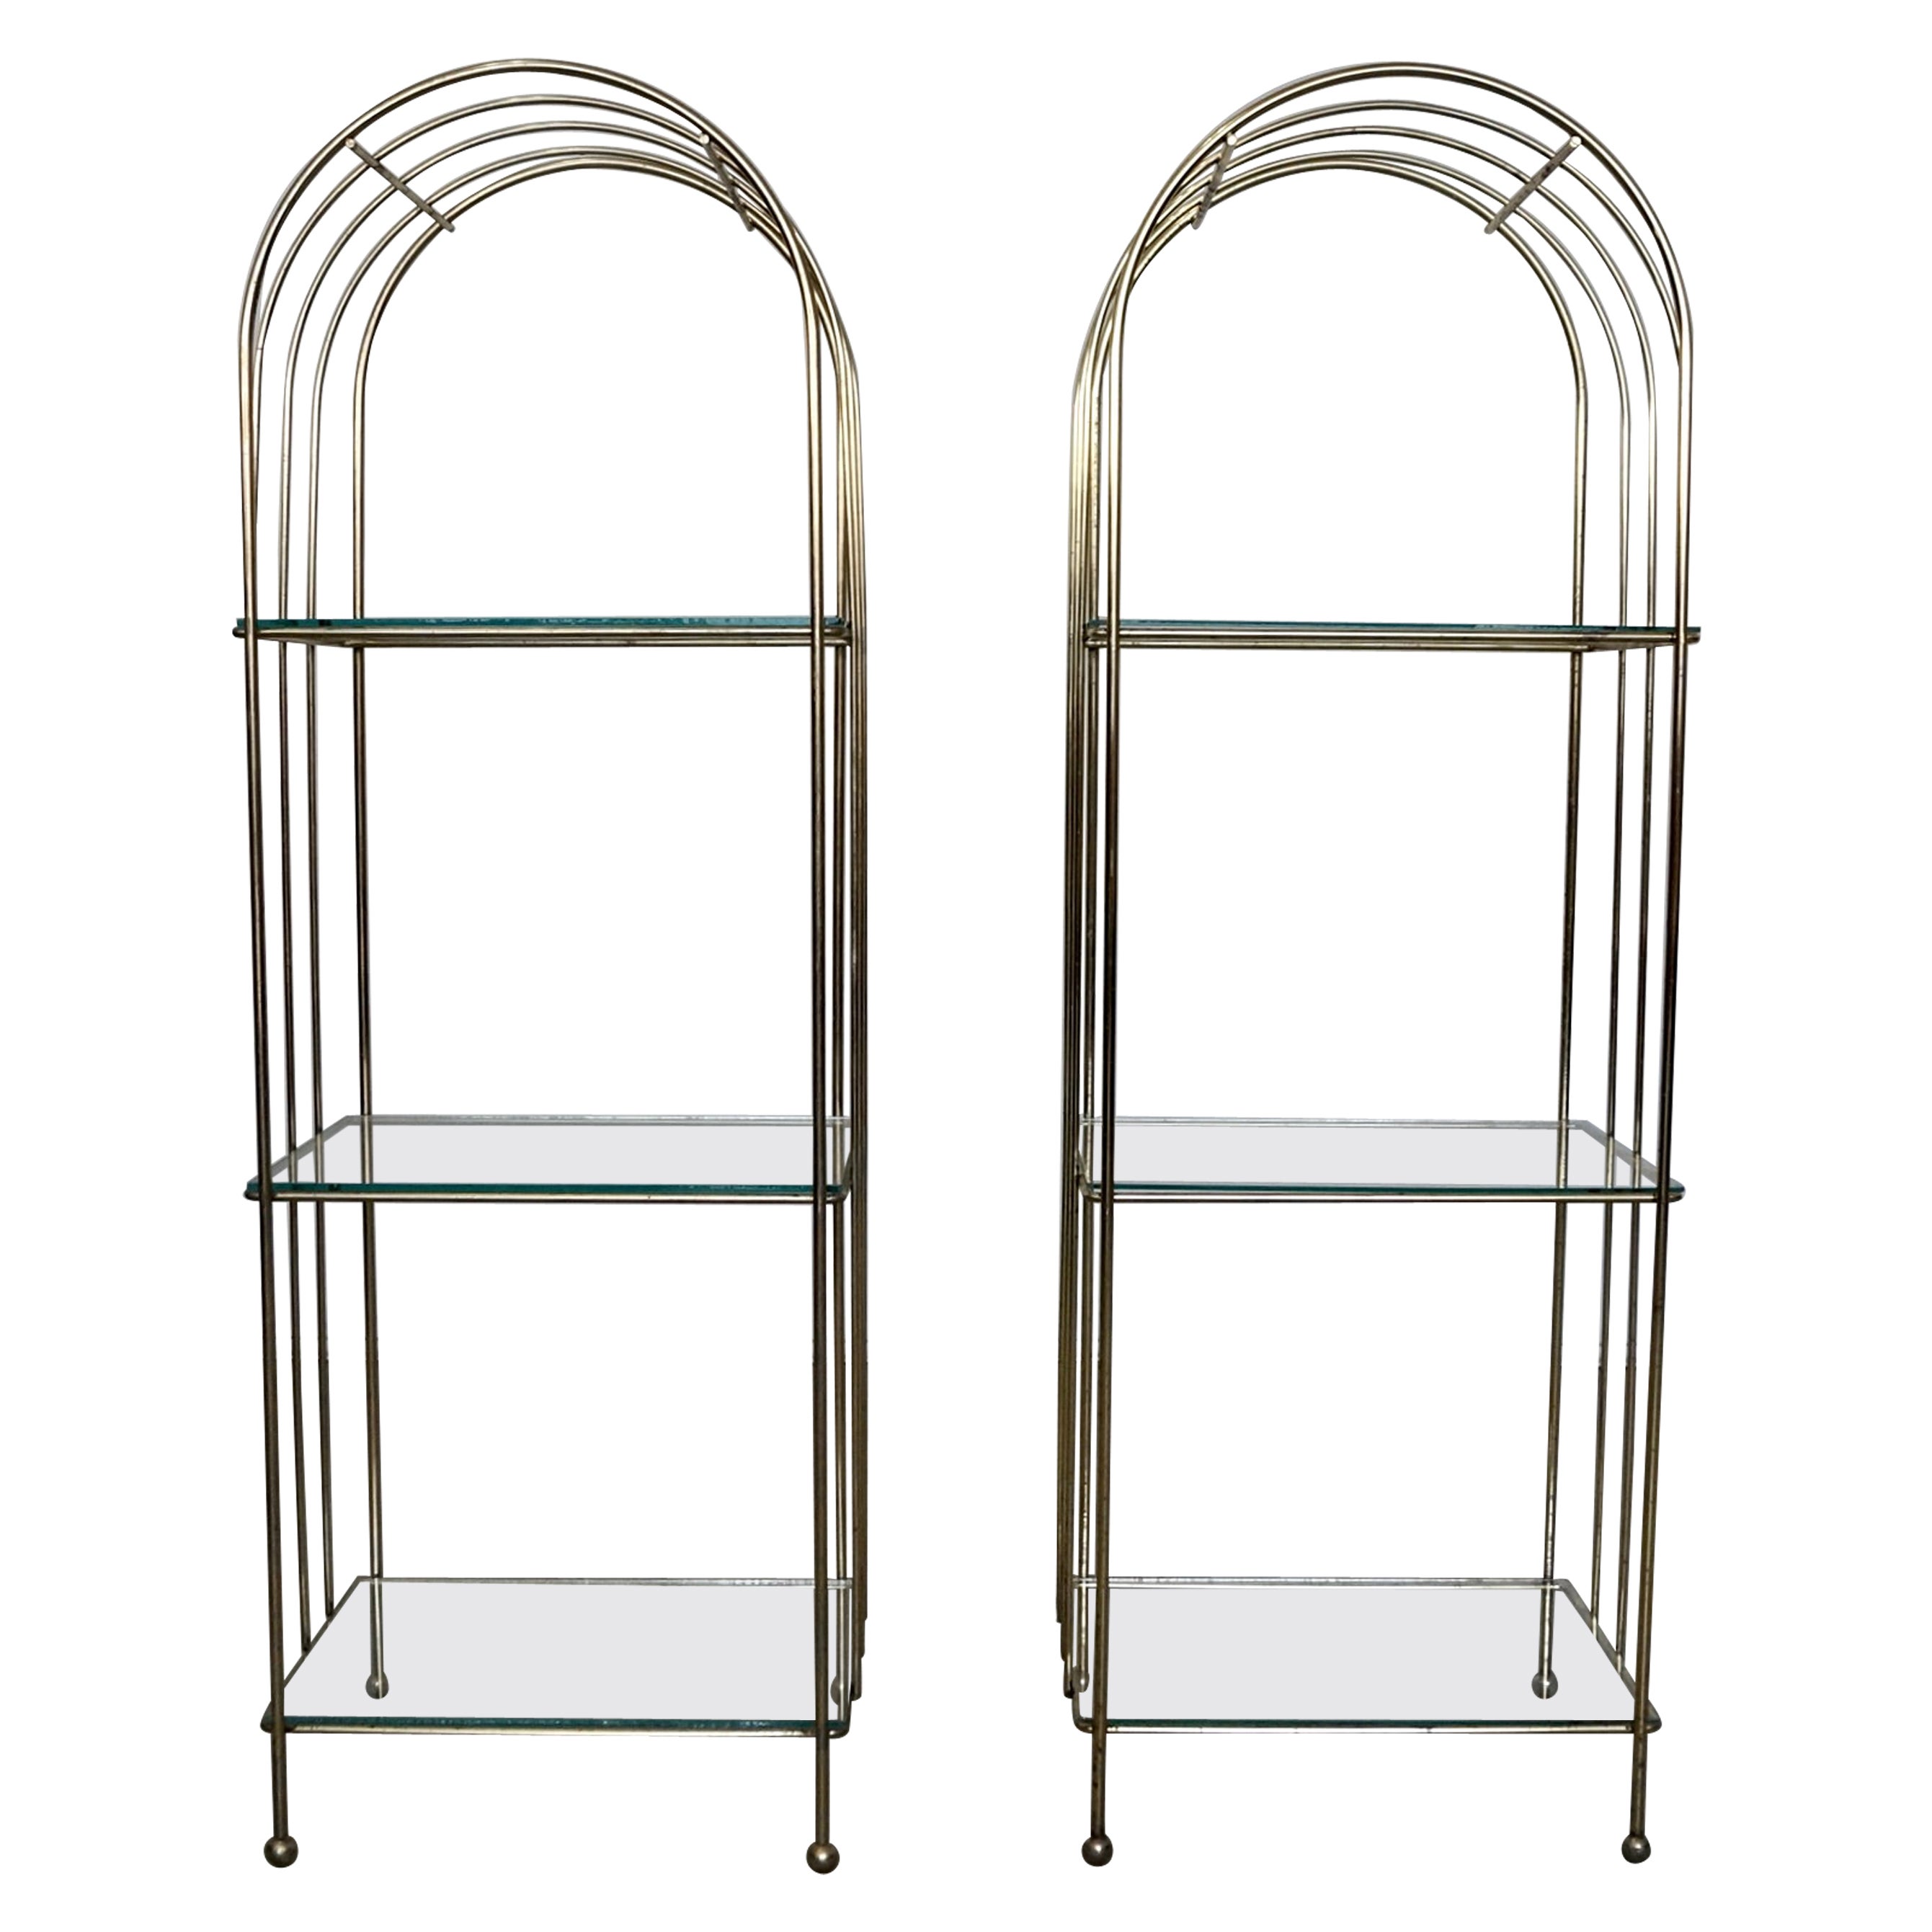 1970's Hollywood Regency Brass Etagere Shelves, a Pair For Sale